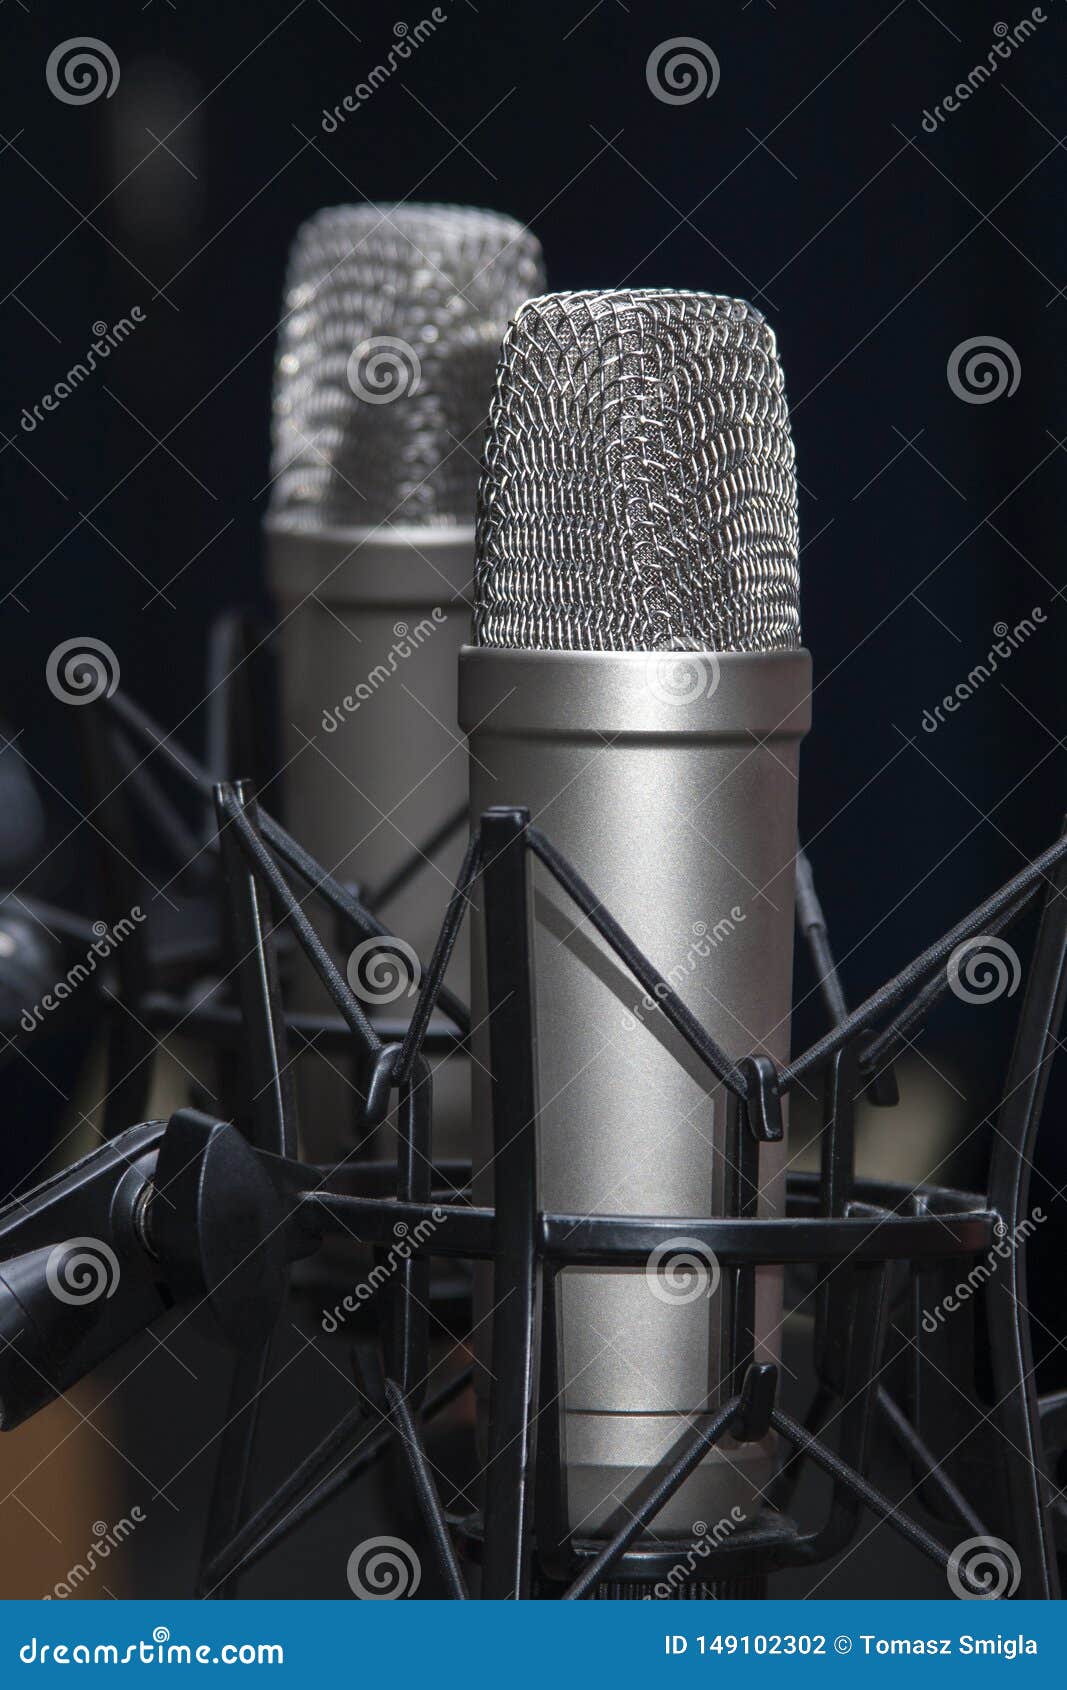 two professional studio microphones on stands, podcasting, voiceover